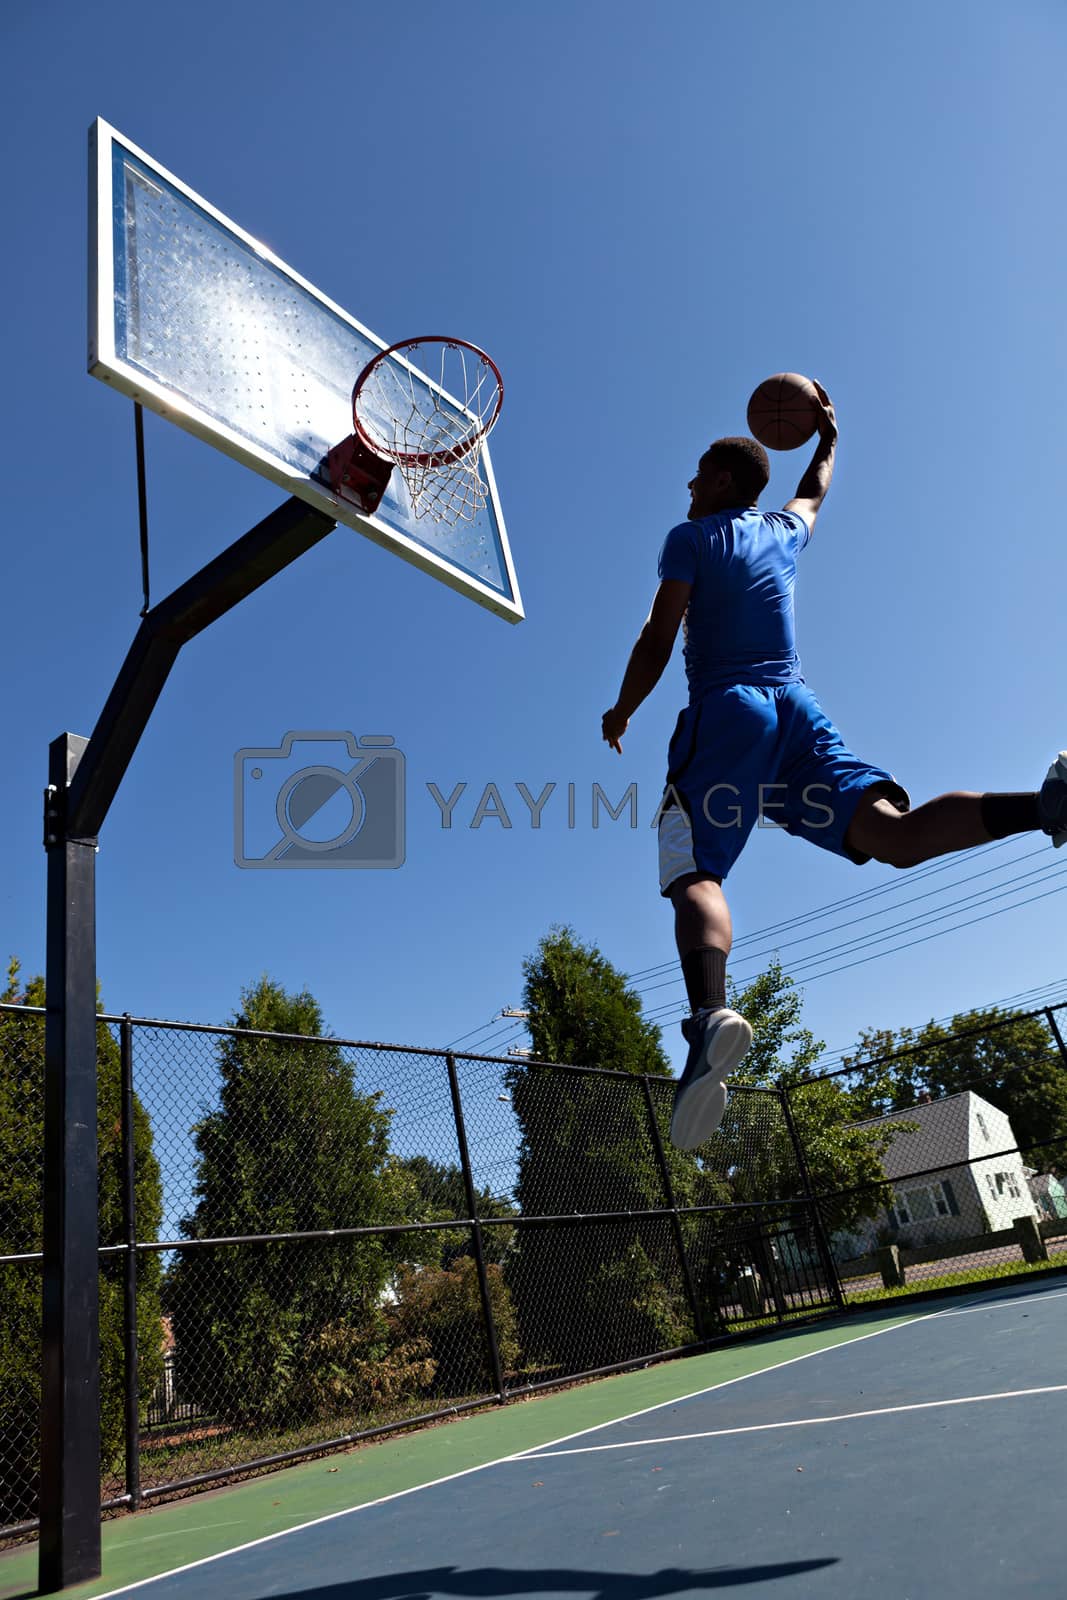 Royalty free image of Man Dunking the Basketball by graficallyminded